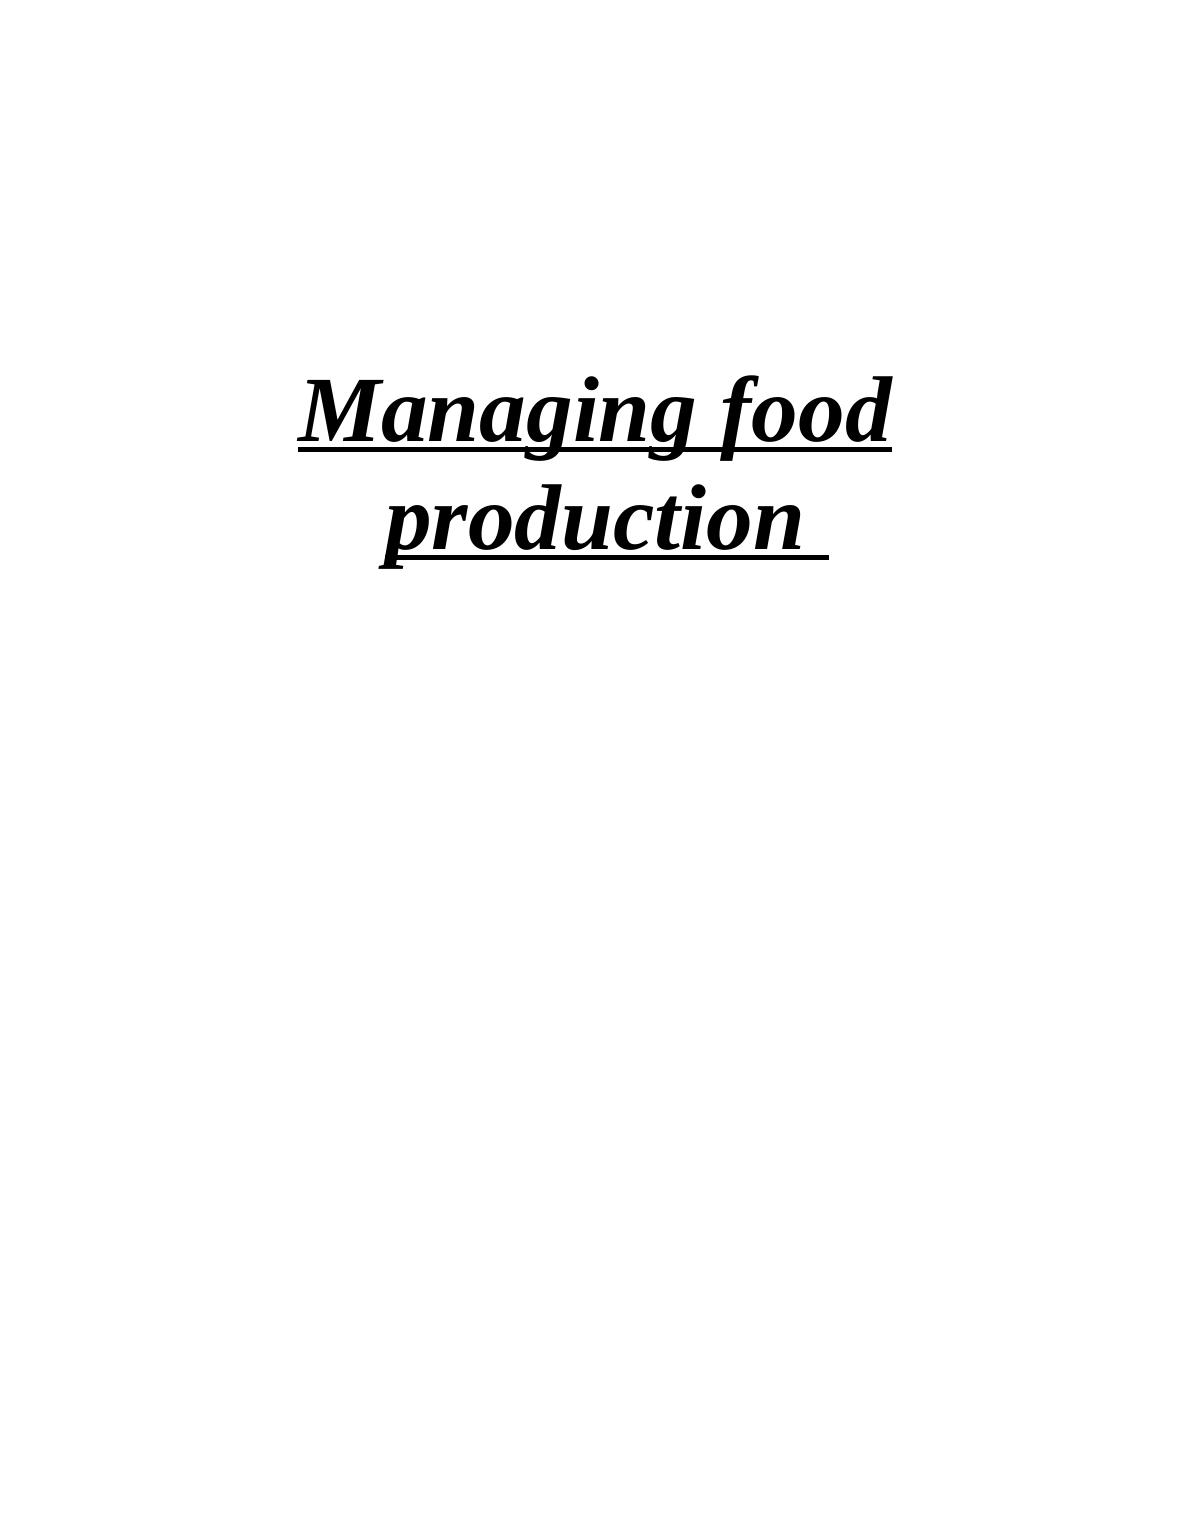 Managing Food and Beverage Production : Assignment_1